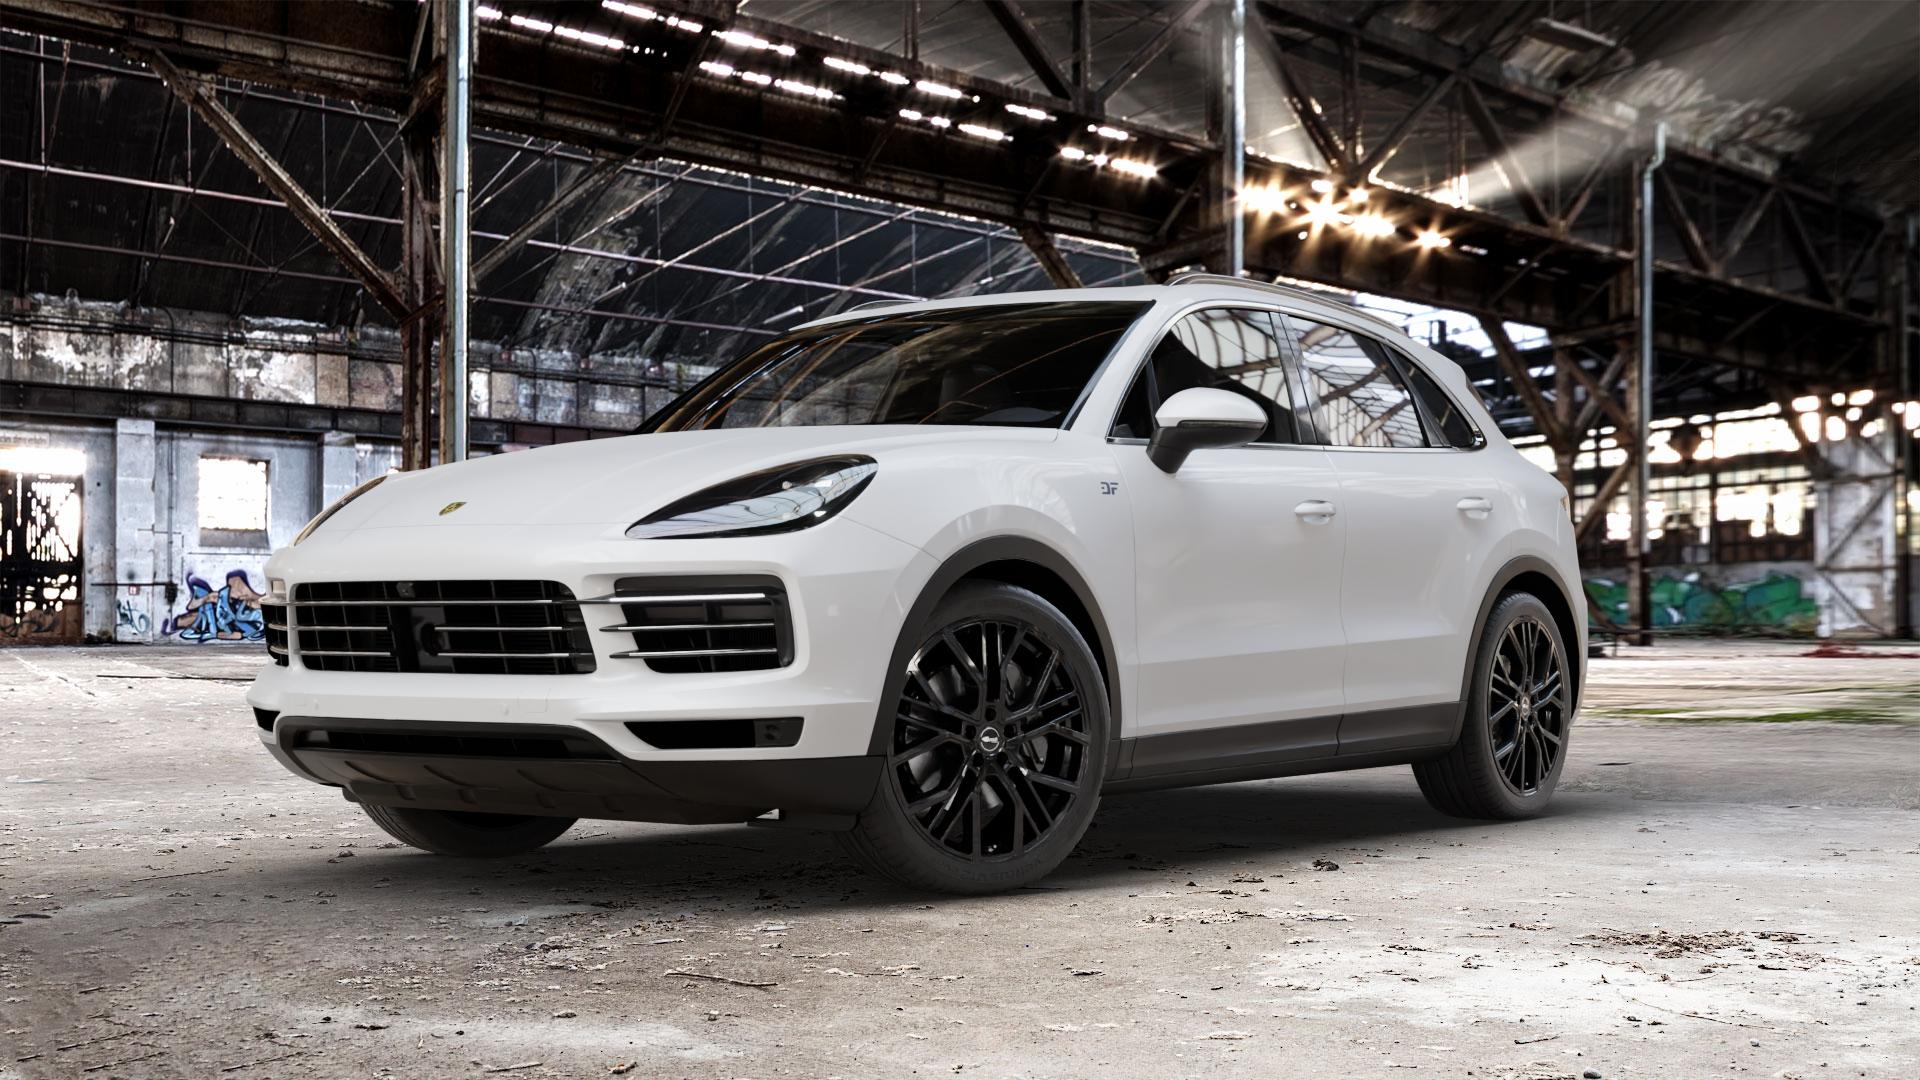 Porsche Cayenne III Type 9YA 4,0l Turbo S E-Hybrid 404kW (549 hp) Wheels  and Tyre Packages